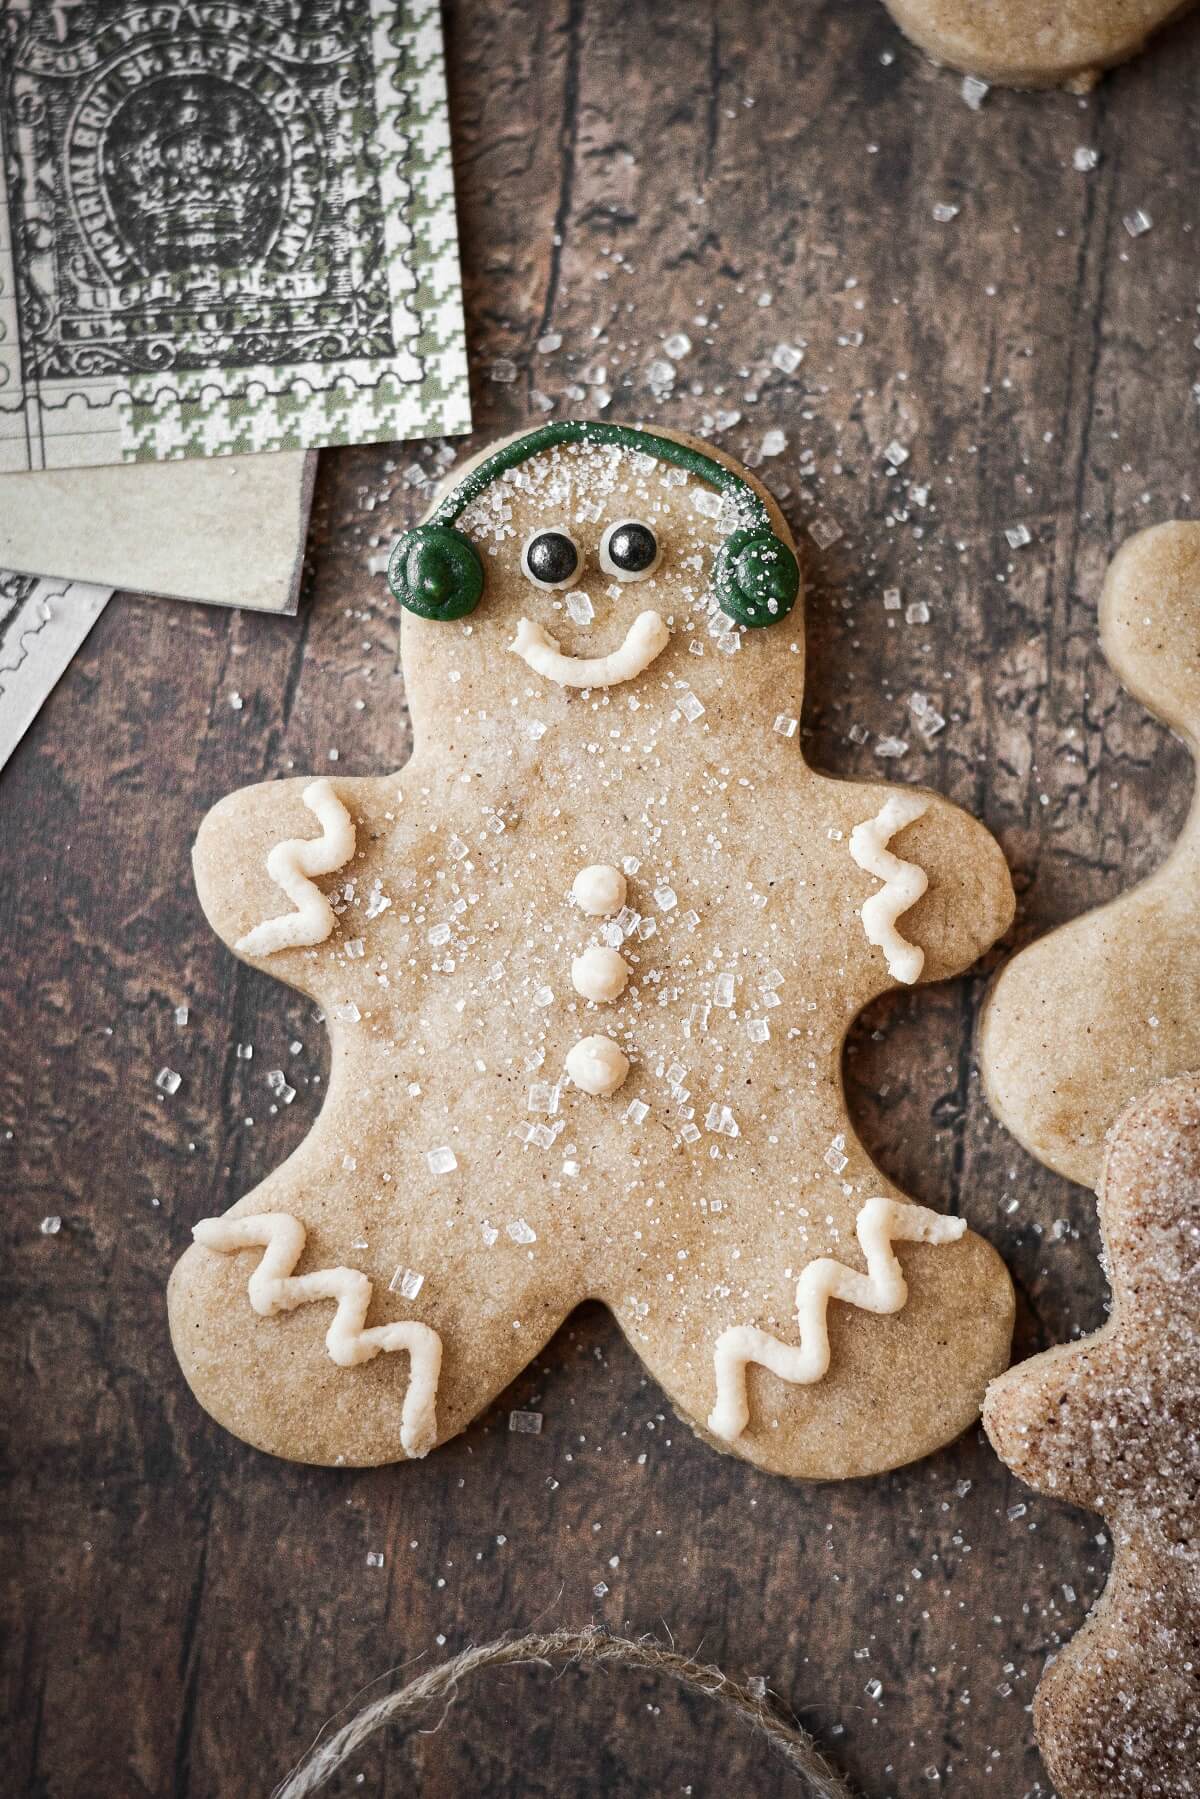 A gingerbread cookie decorated with green ear muffs.